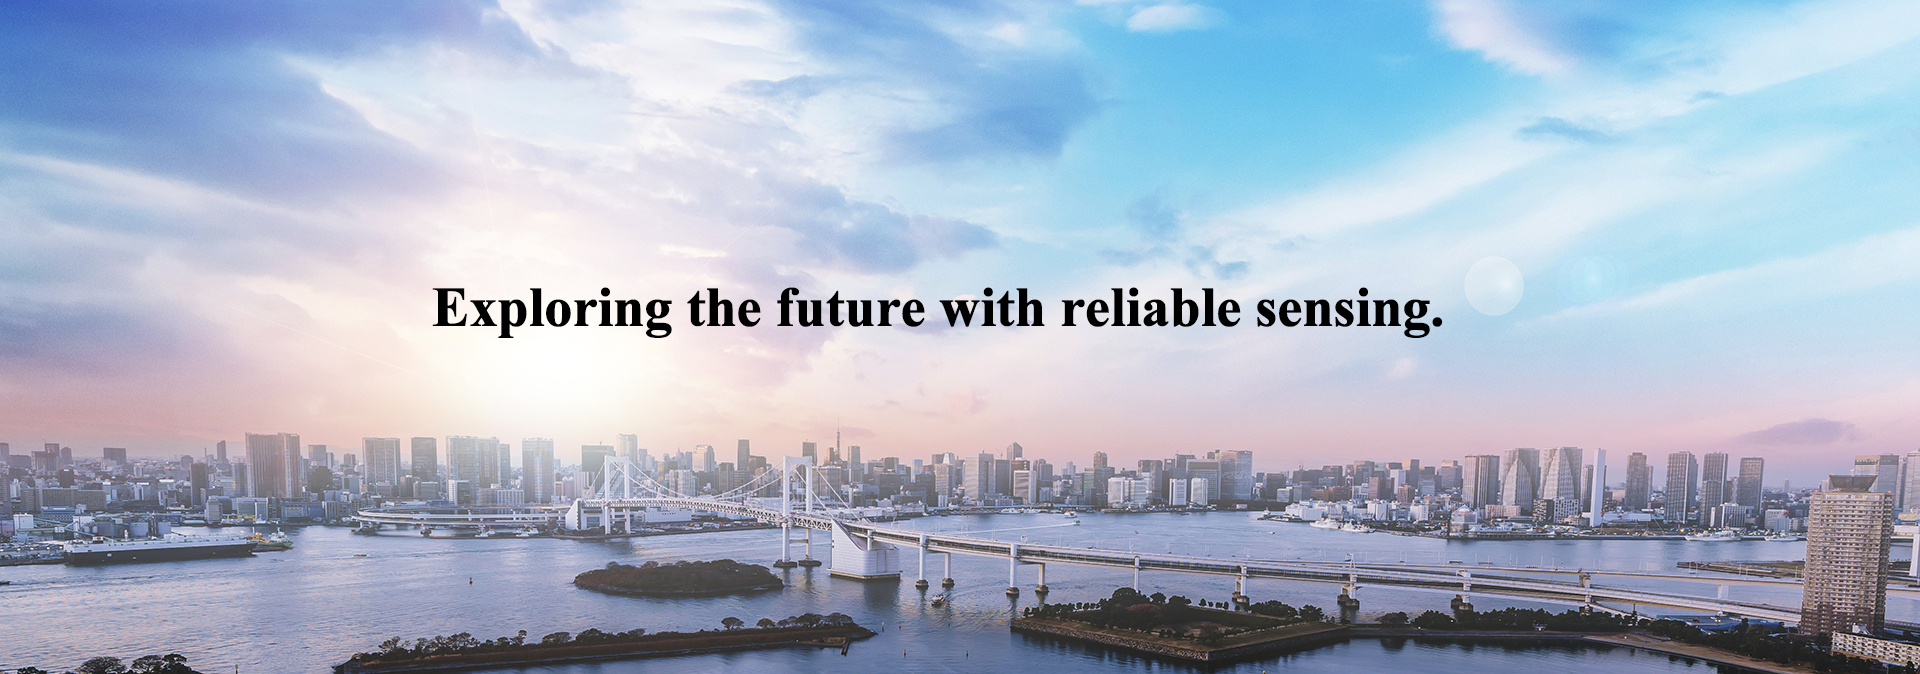 Exploring the future with reliable sensing.